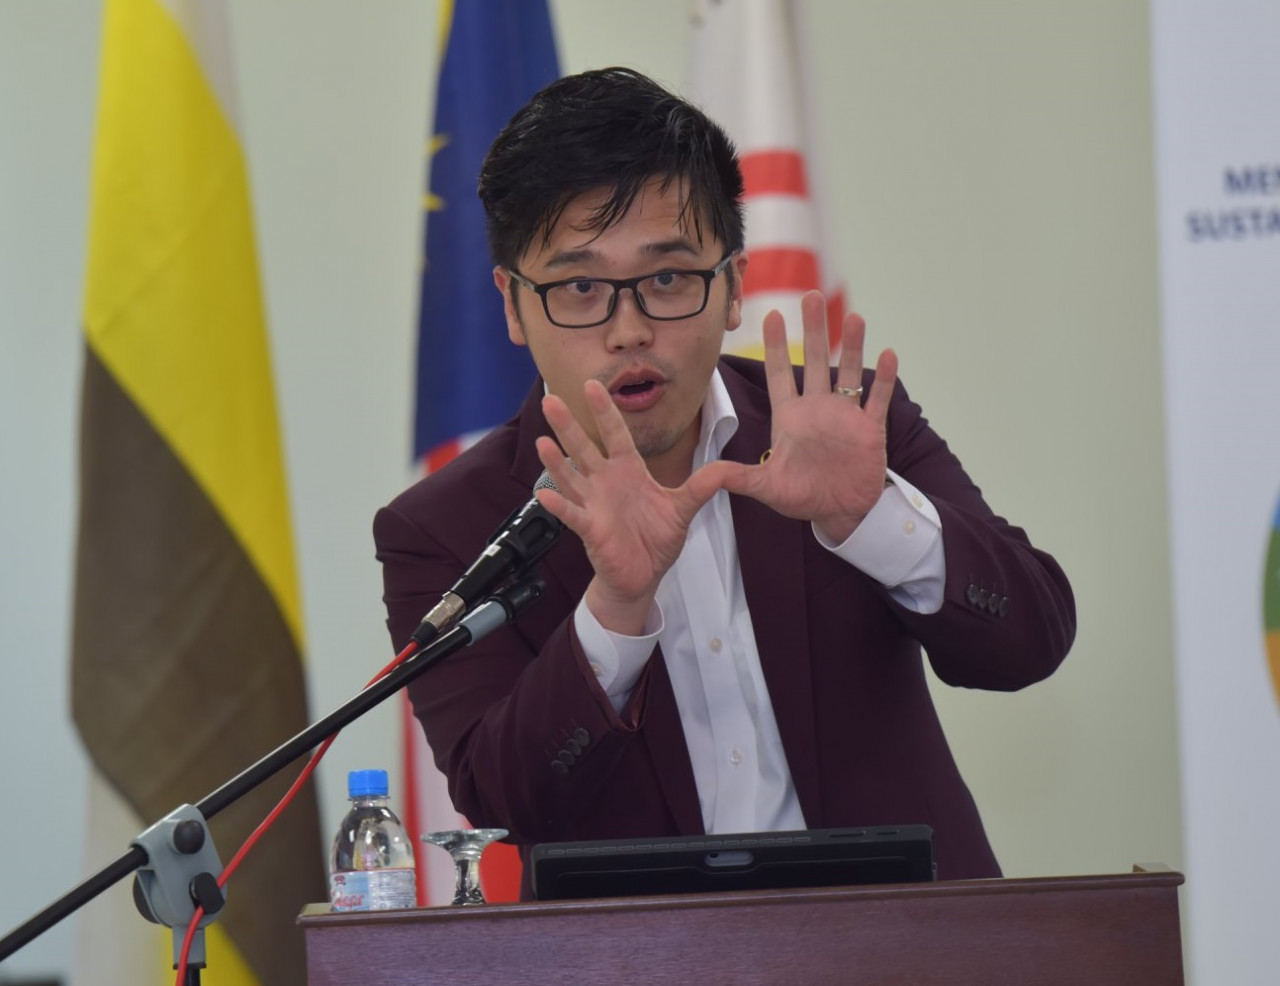 DAP Youth chief Howard Lee says substantive and valid submissions to remove the Dewan Rakyat speaker have been snubbed outright. – Facebook pic, September 11, 2021